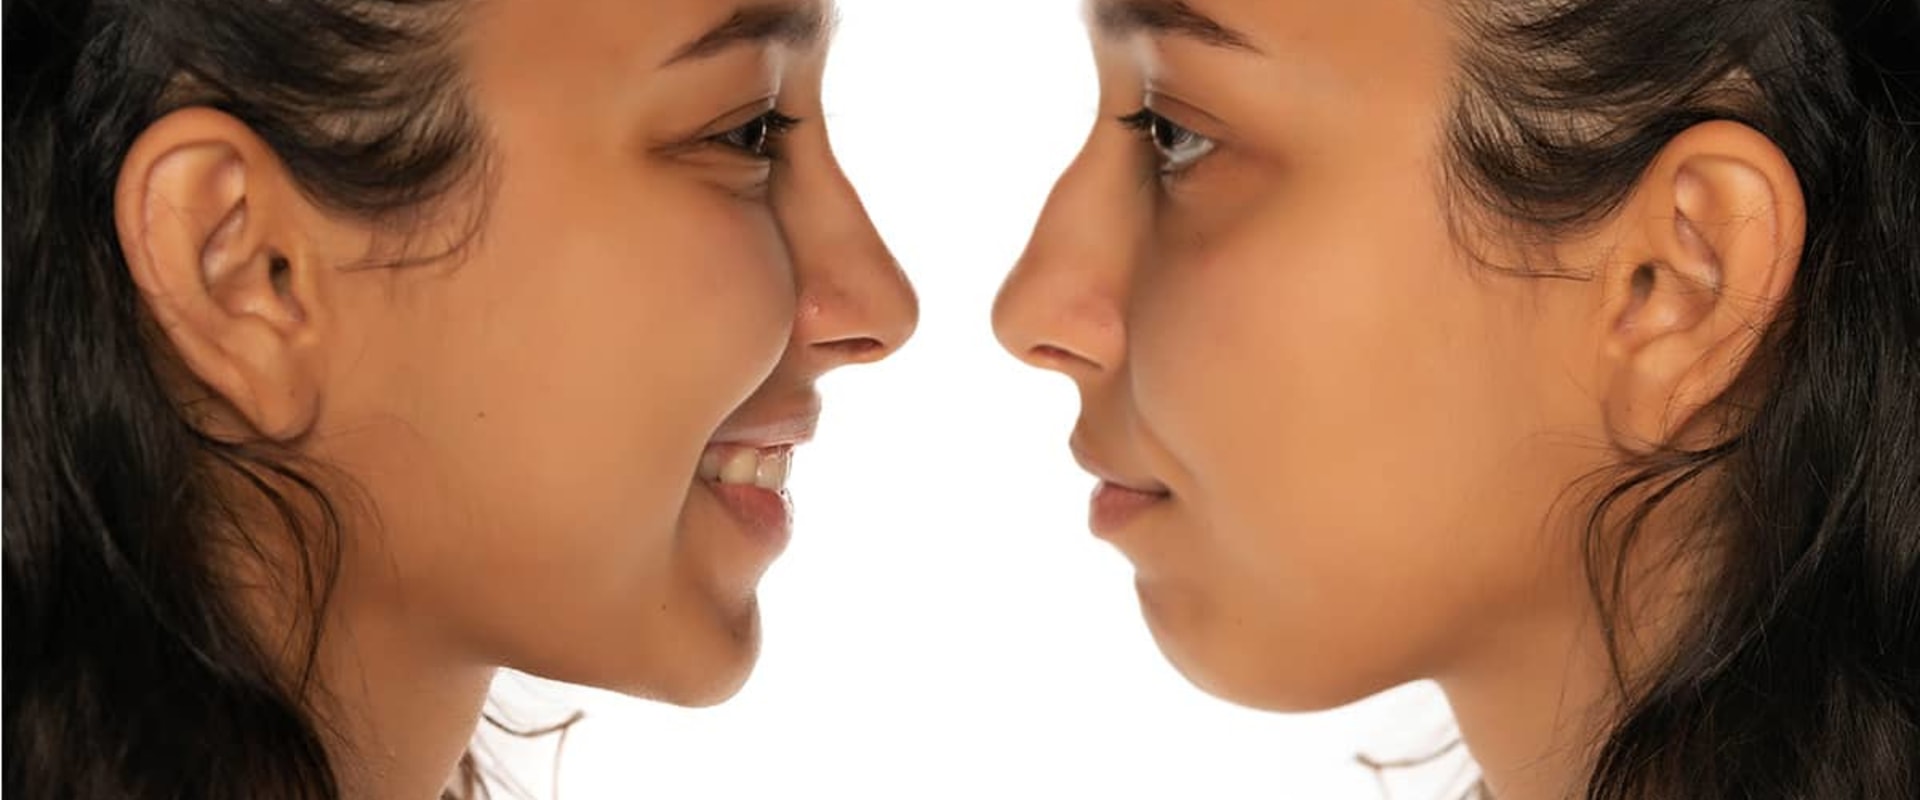 The Truth About Nose Jobs: An Expert's Perspective